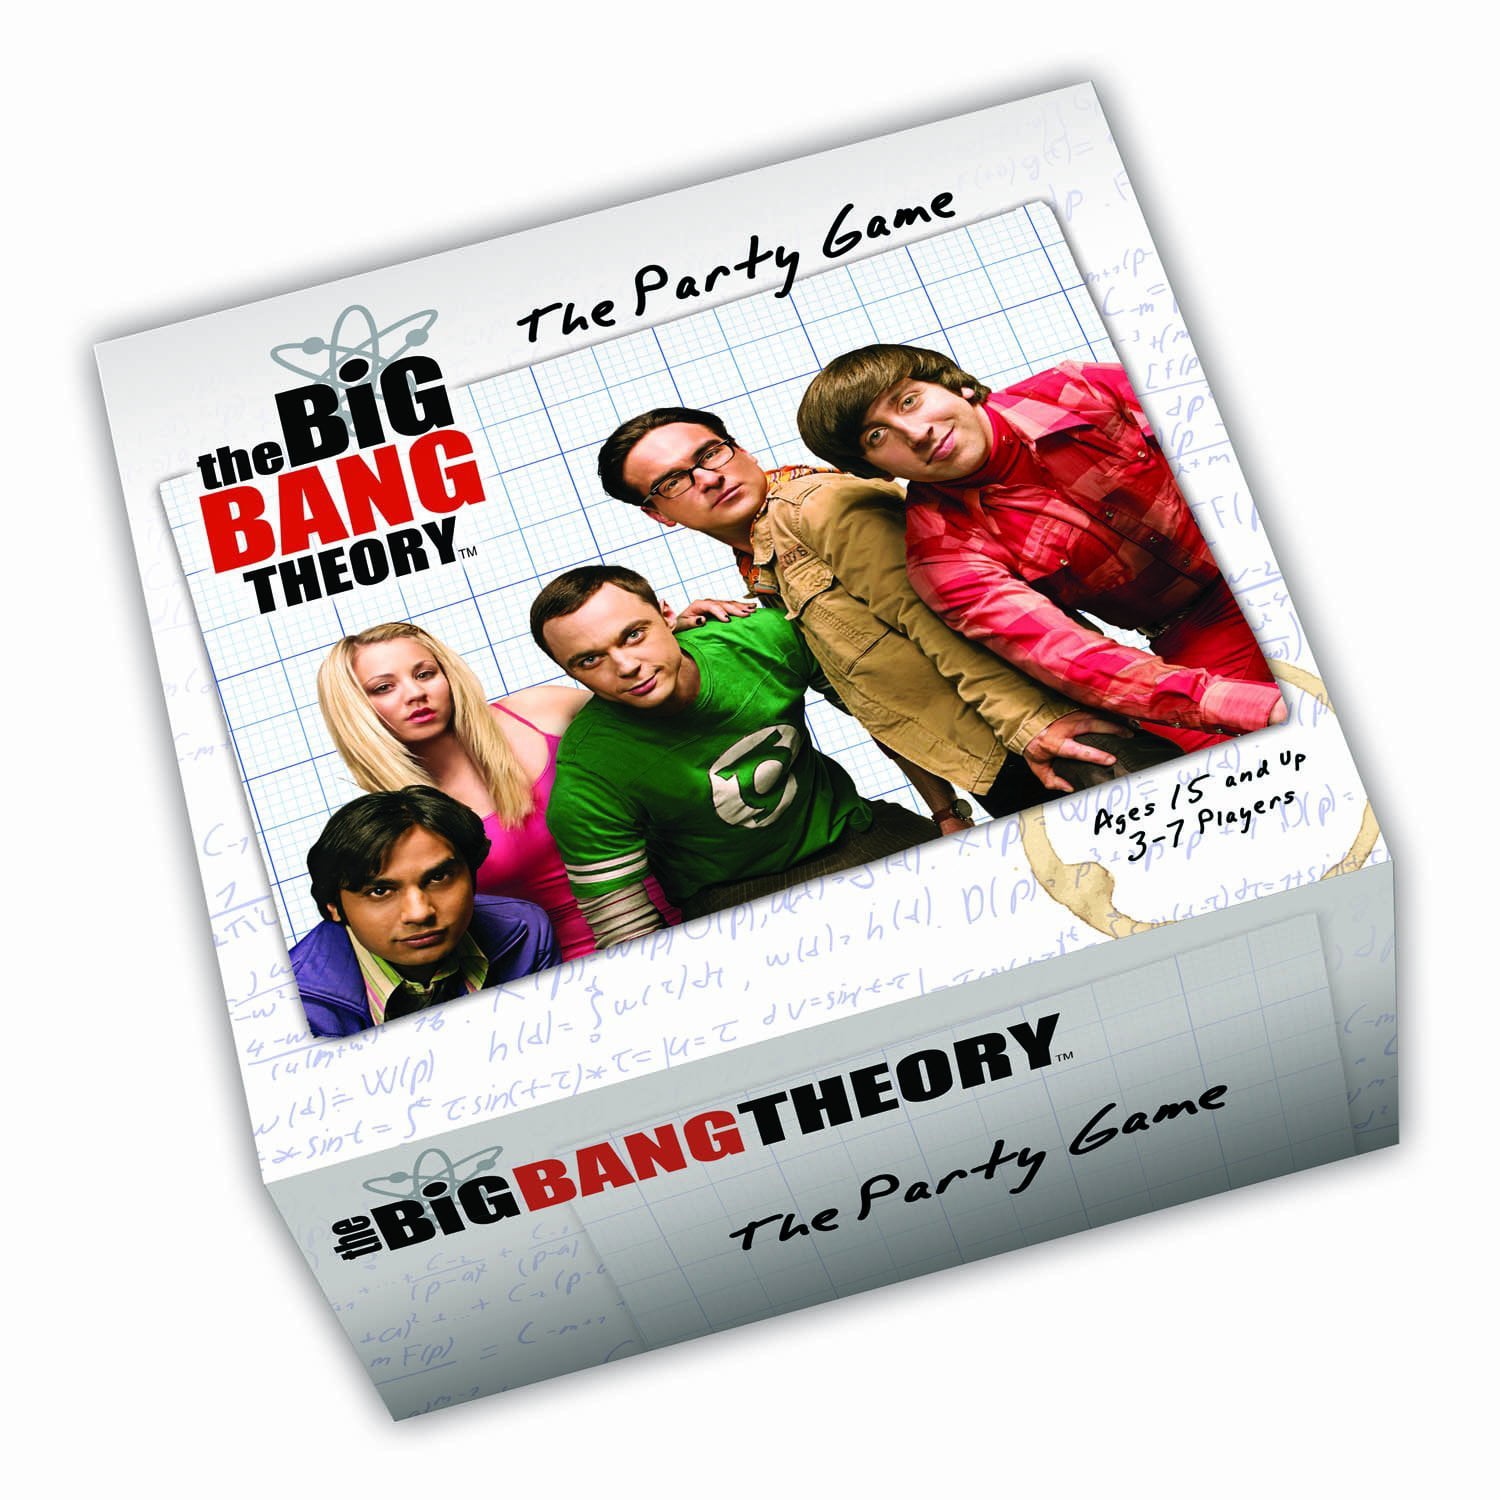 Trivial Pursuit travel edition The Big Bang Theory edition 